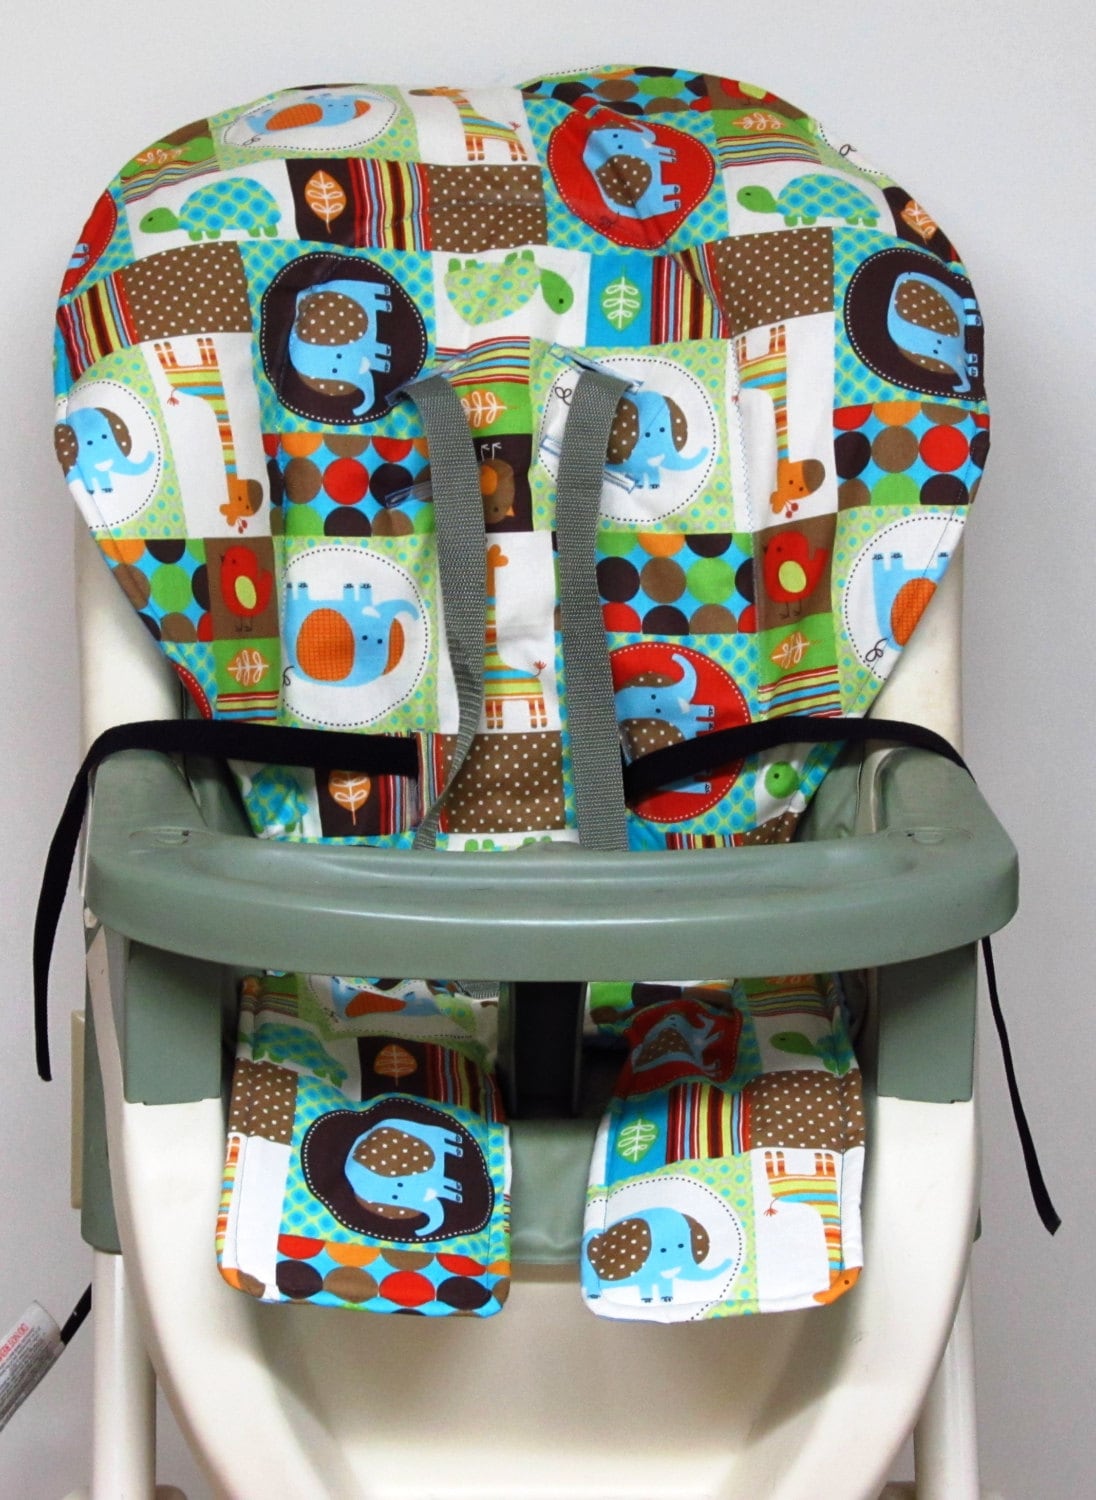 High Chair Cover